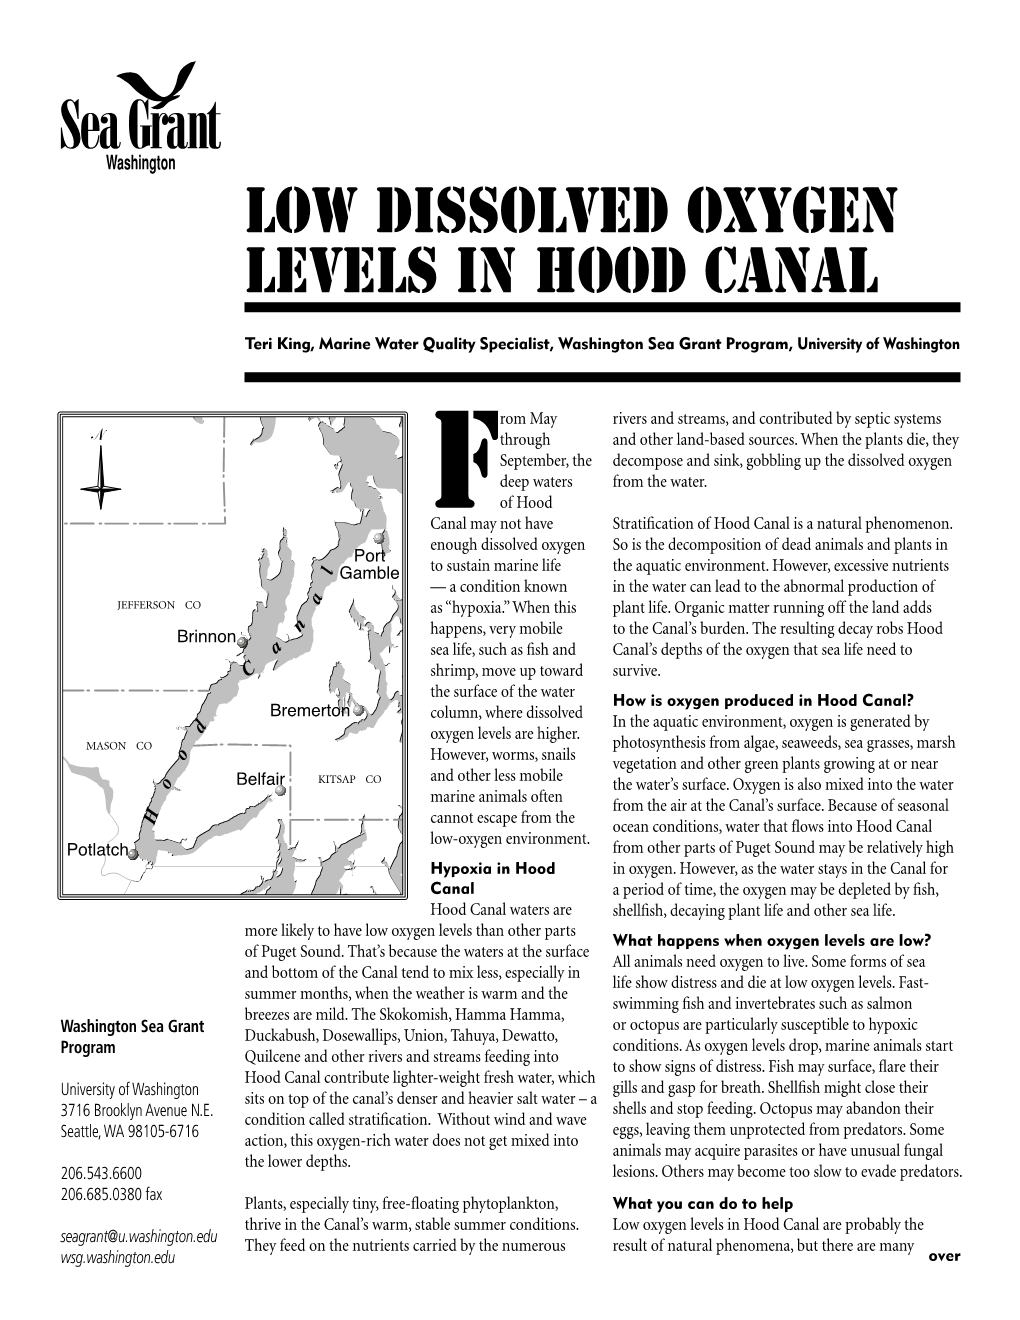 Low Dissolved Oxygen Levels in Hood Canal